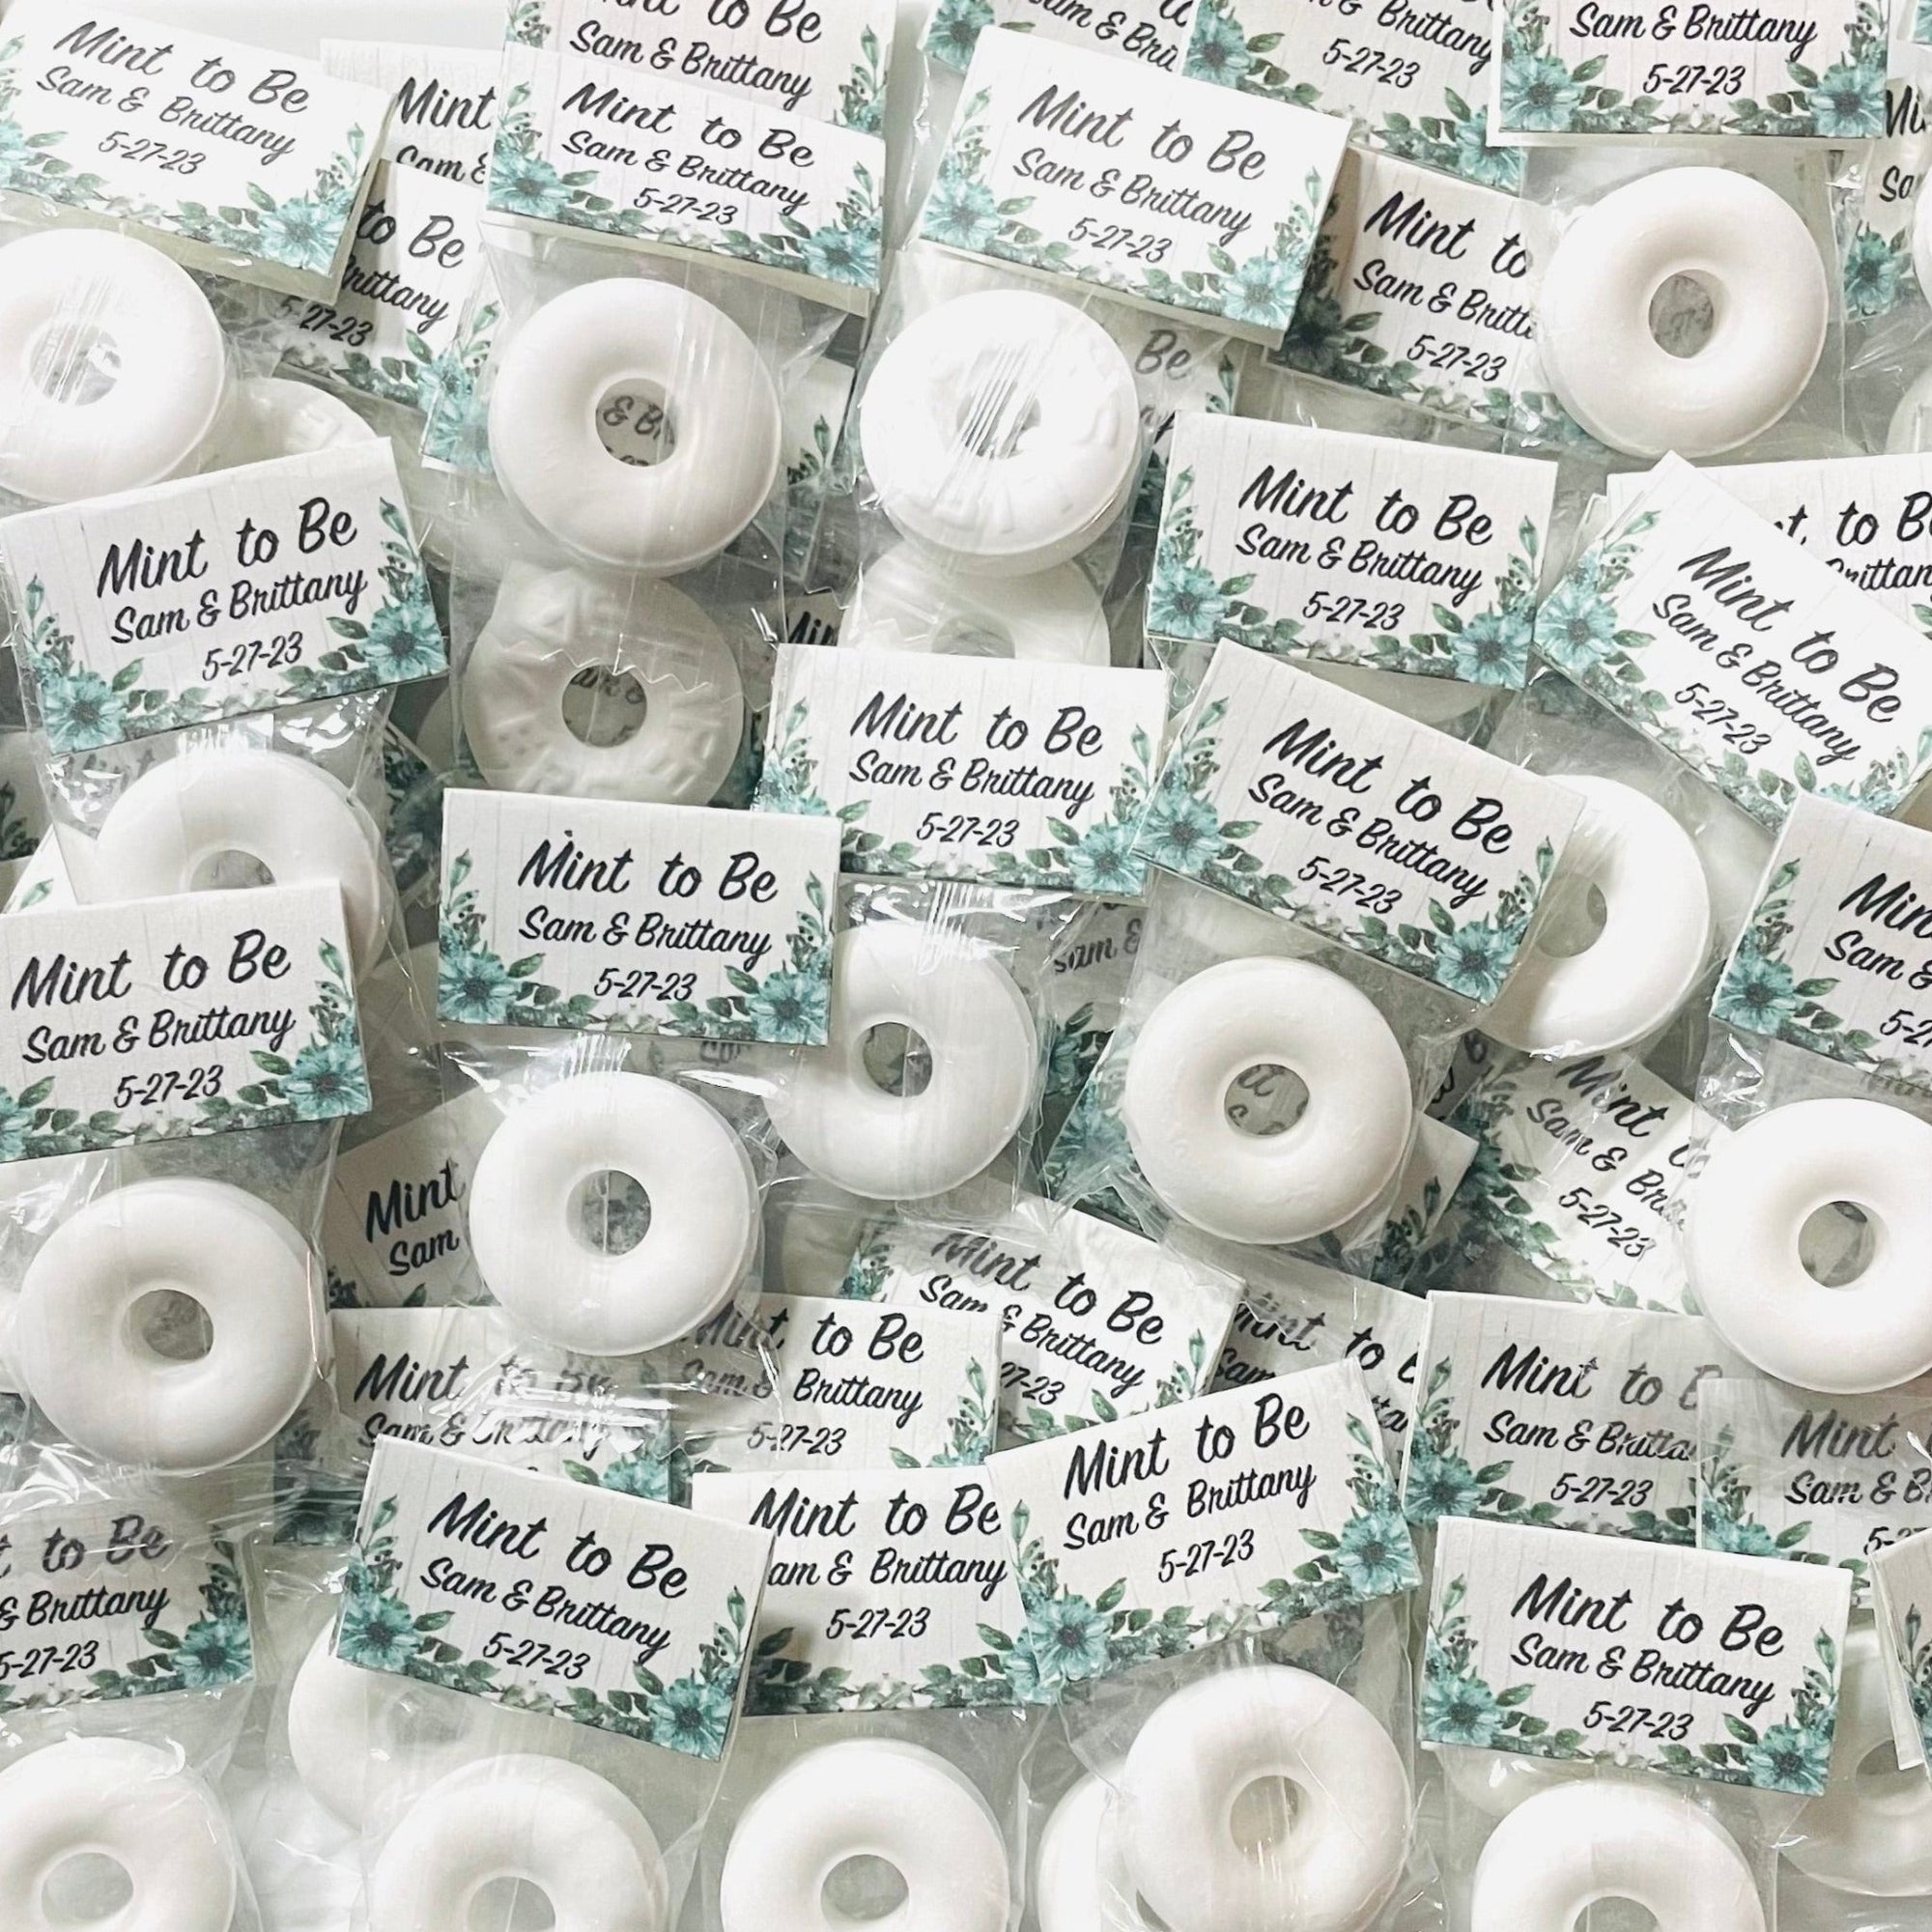 5 Sweet & Cheap Wedding Favors Guests Will Love